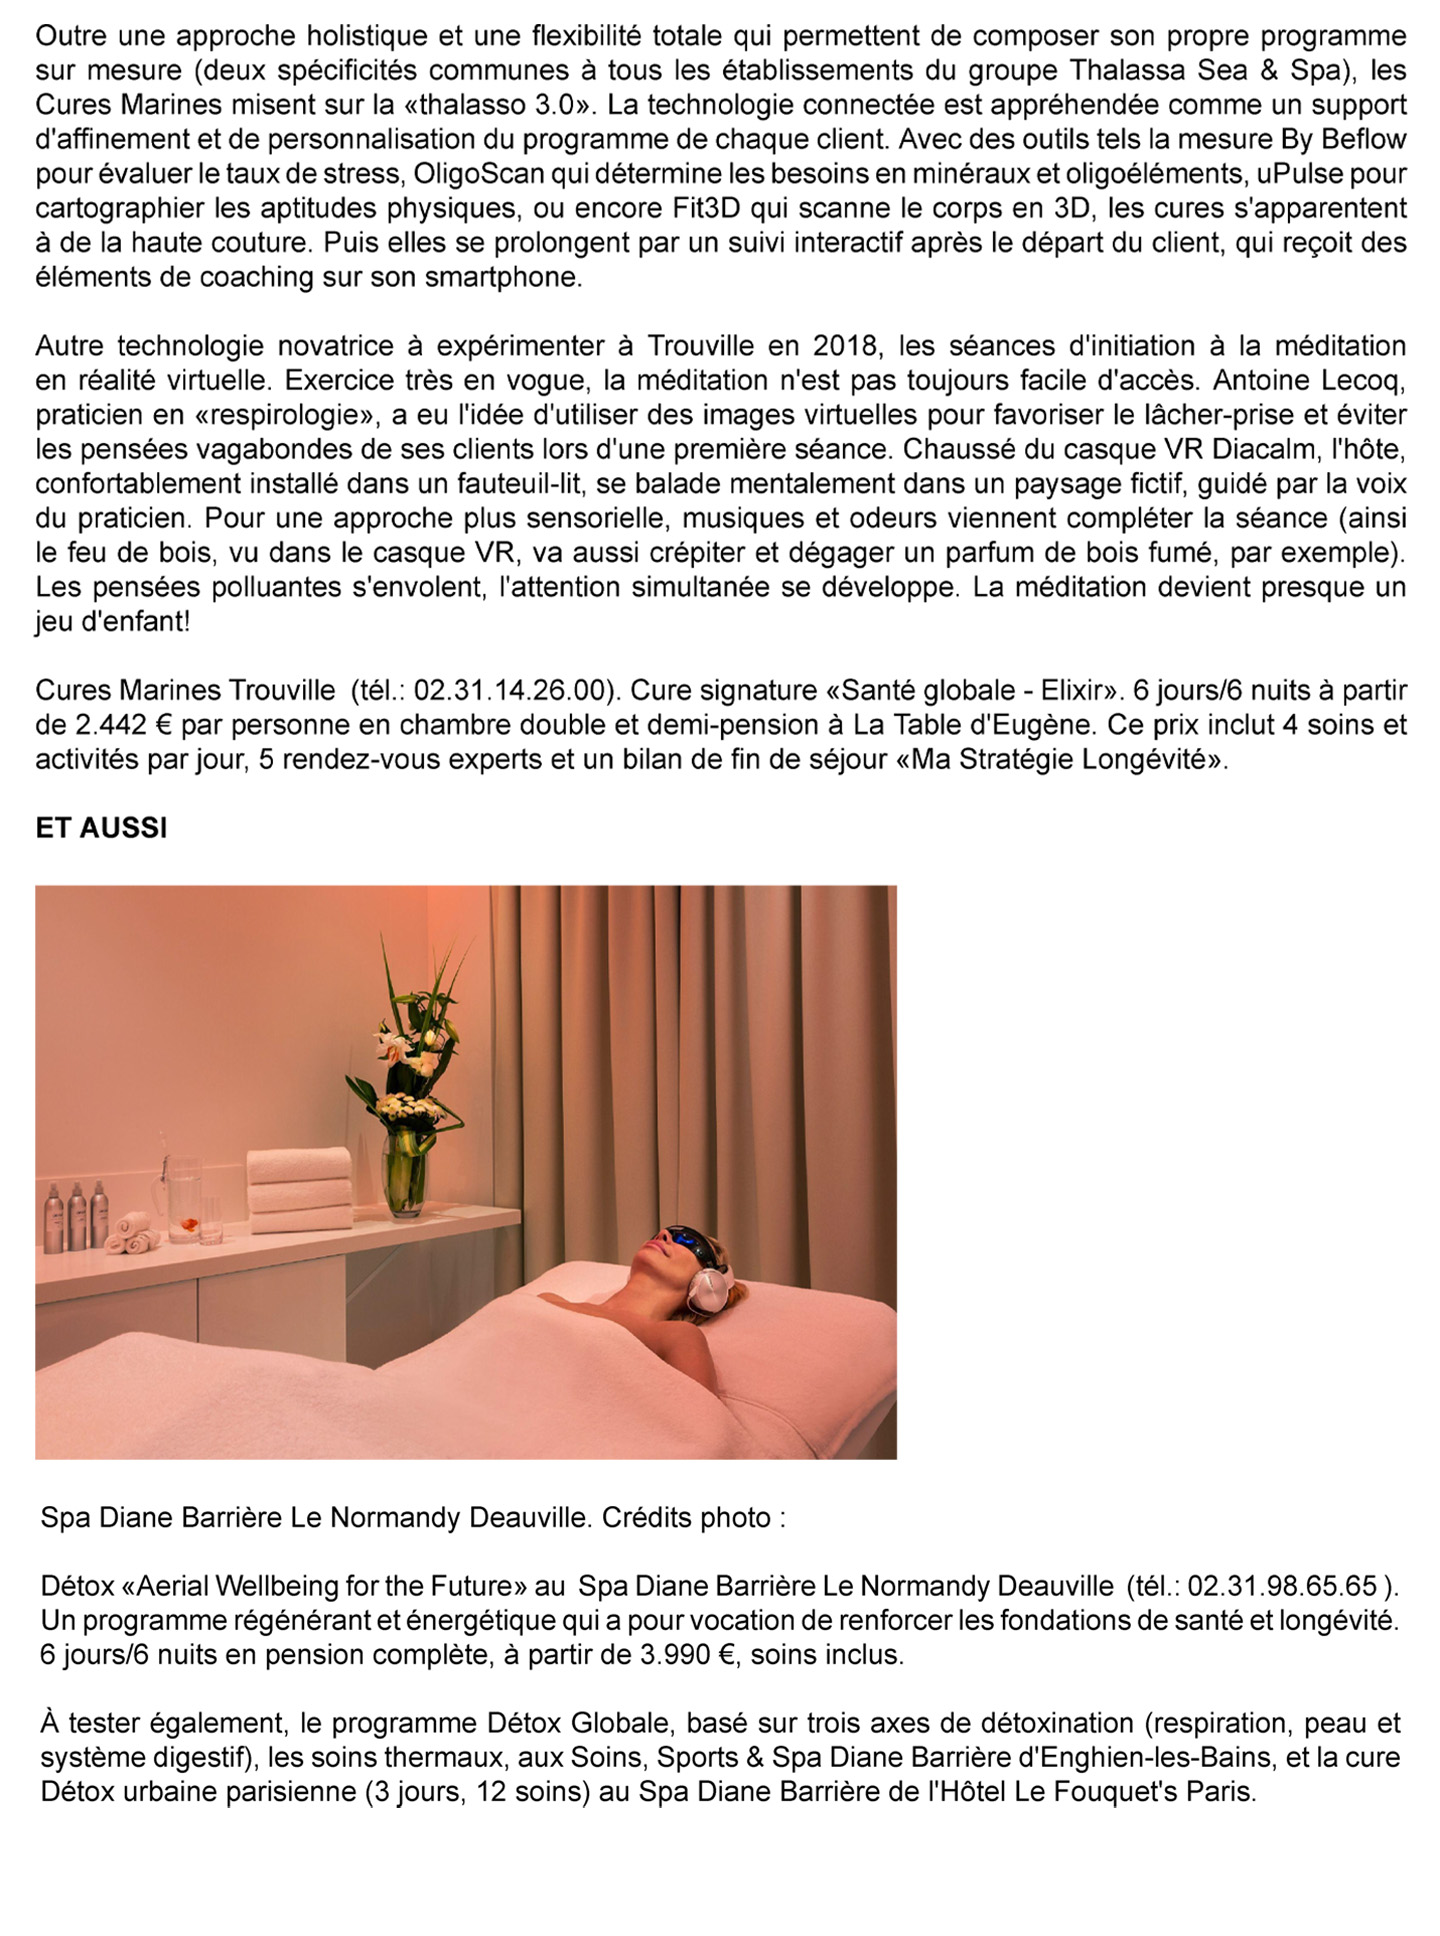 Article on the Trouville marine cures realized by the jean-Philippe Nuel studio in the magazine Le Figaro, new luxury spa hotel, luxury interior design